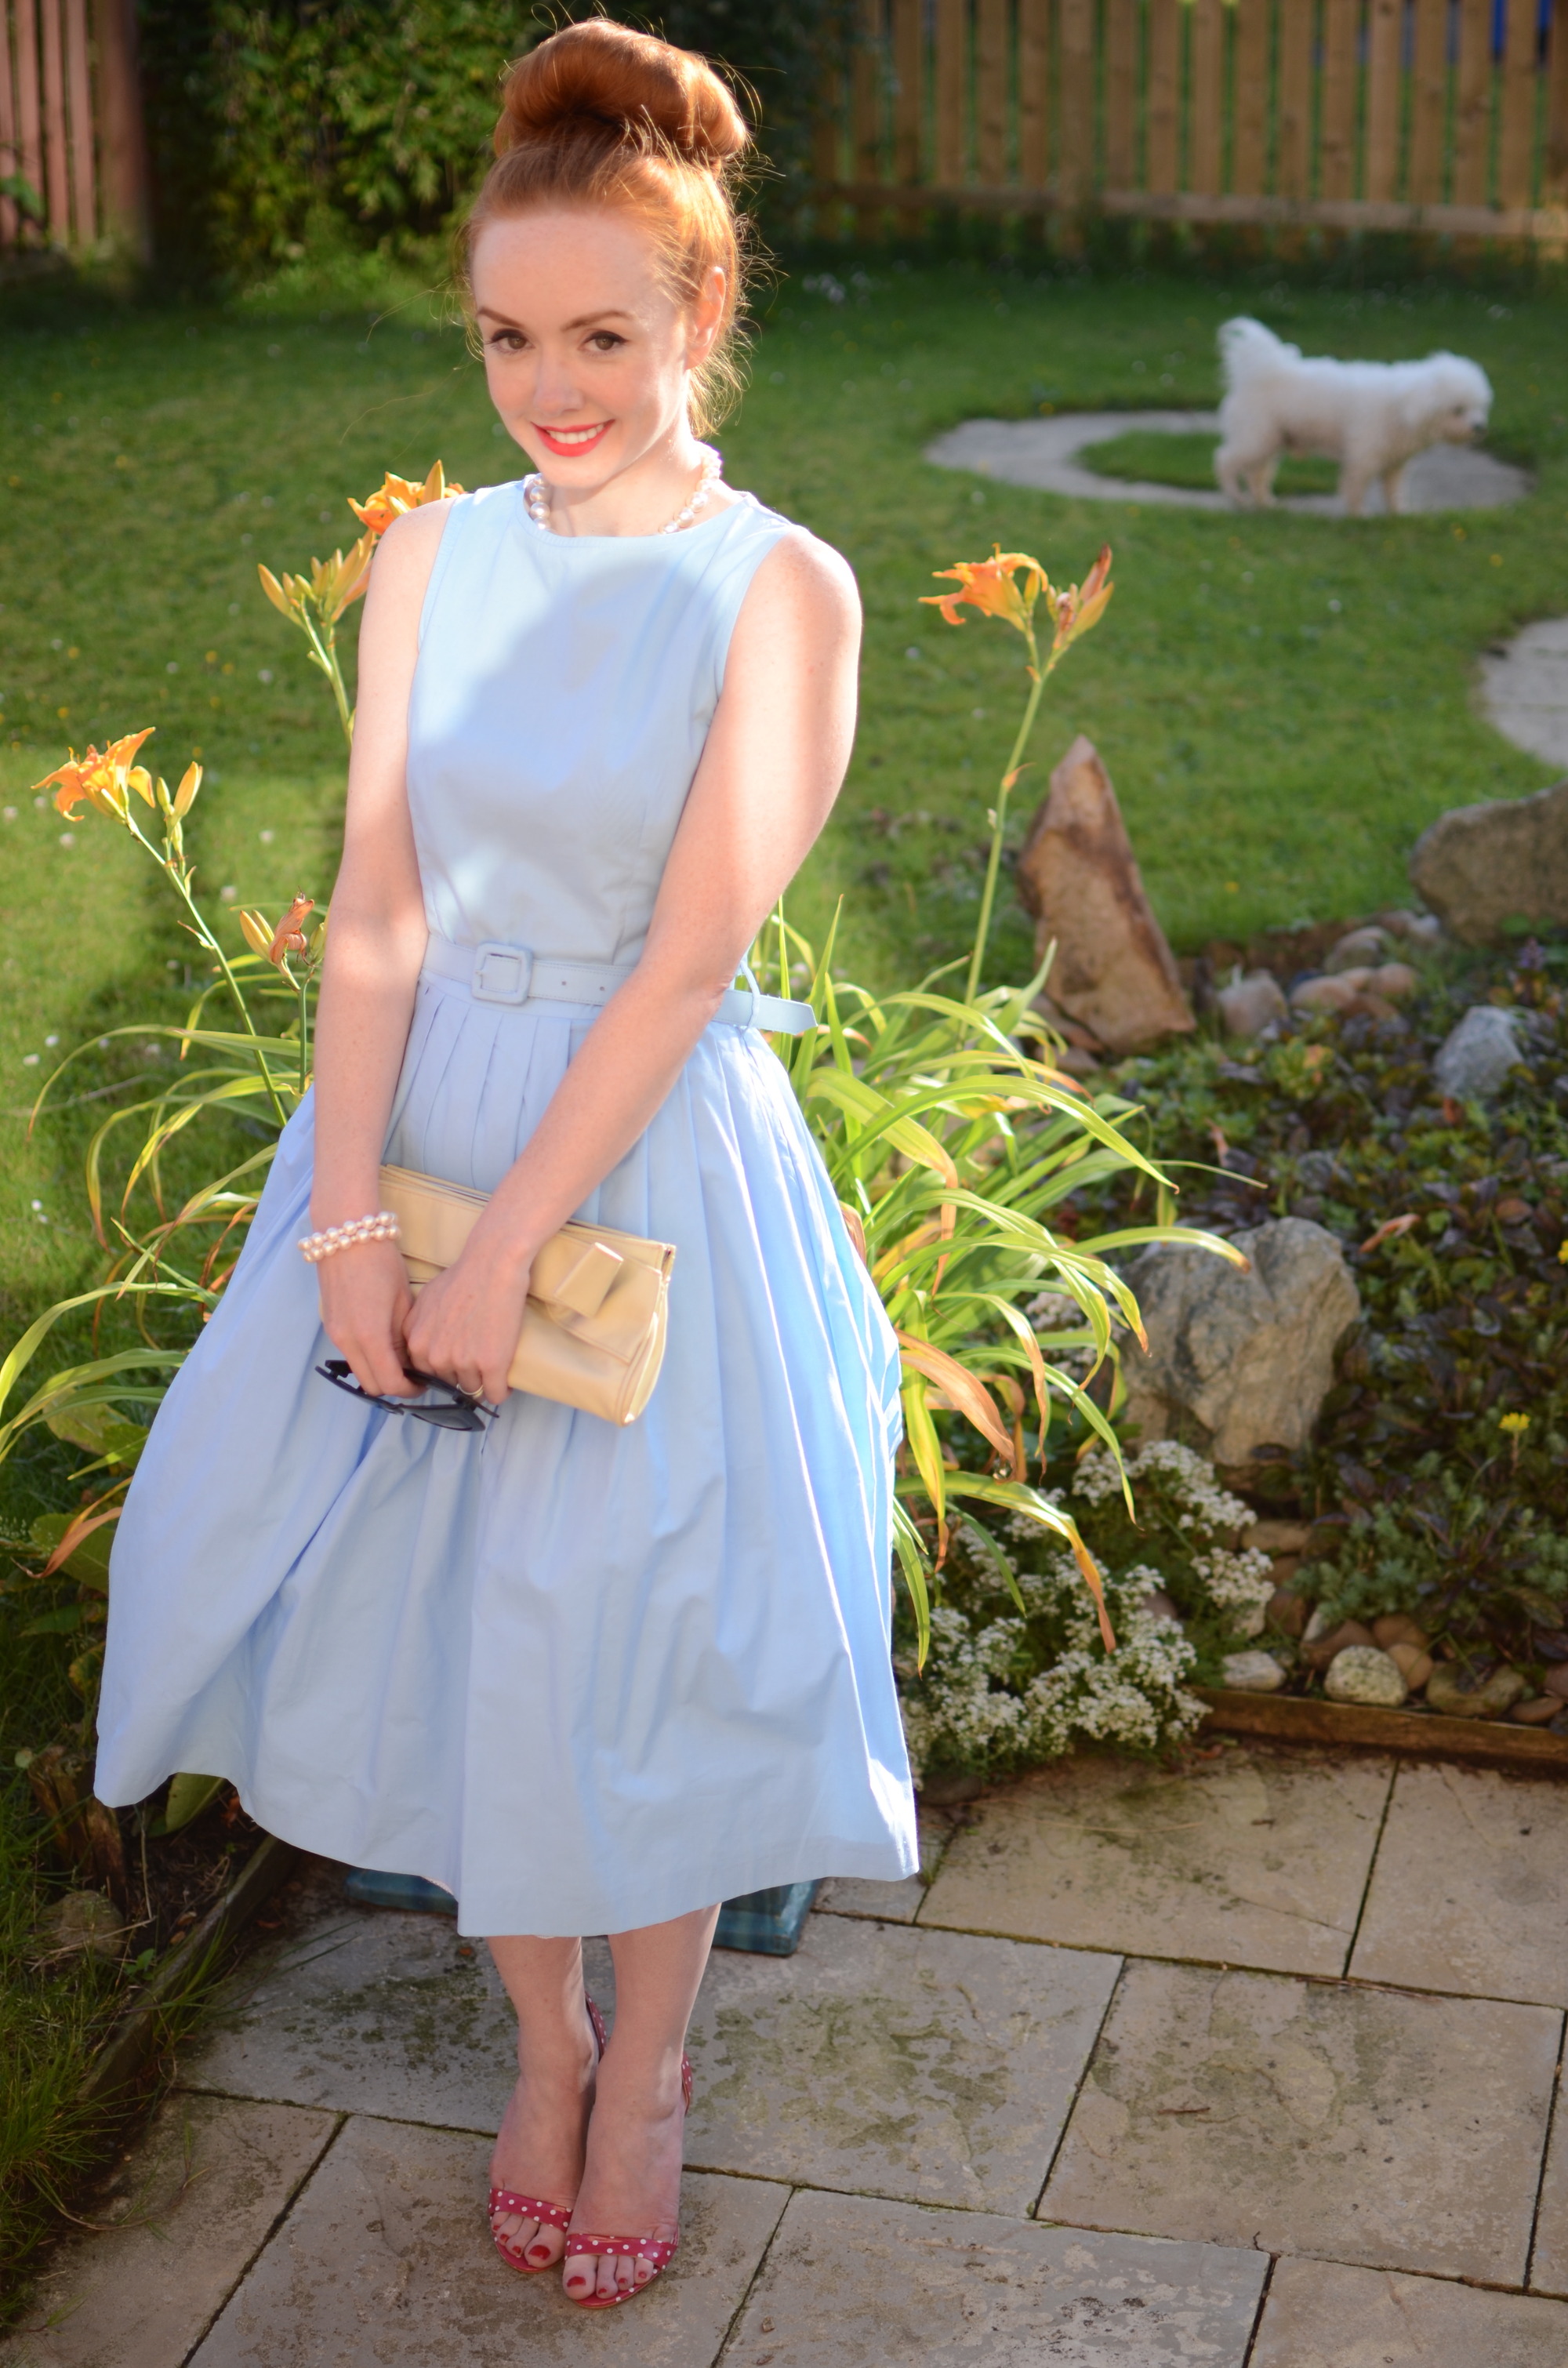 50s inspired prom dress outfit